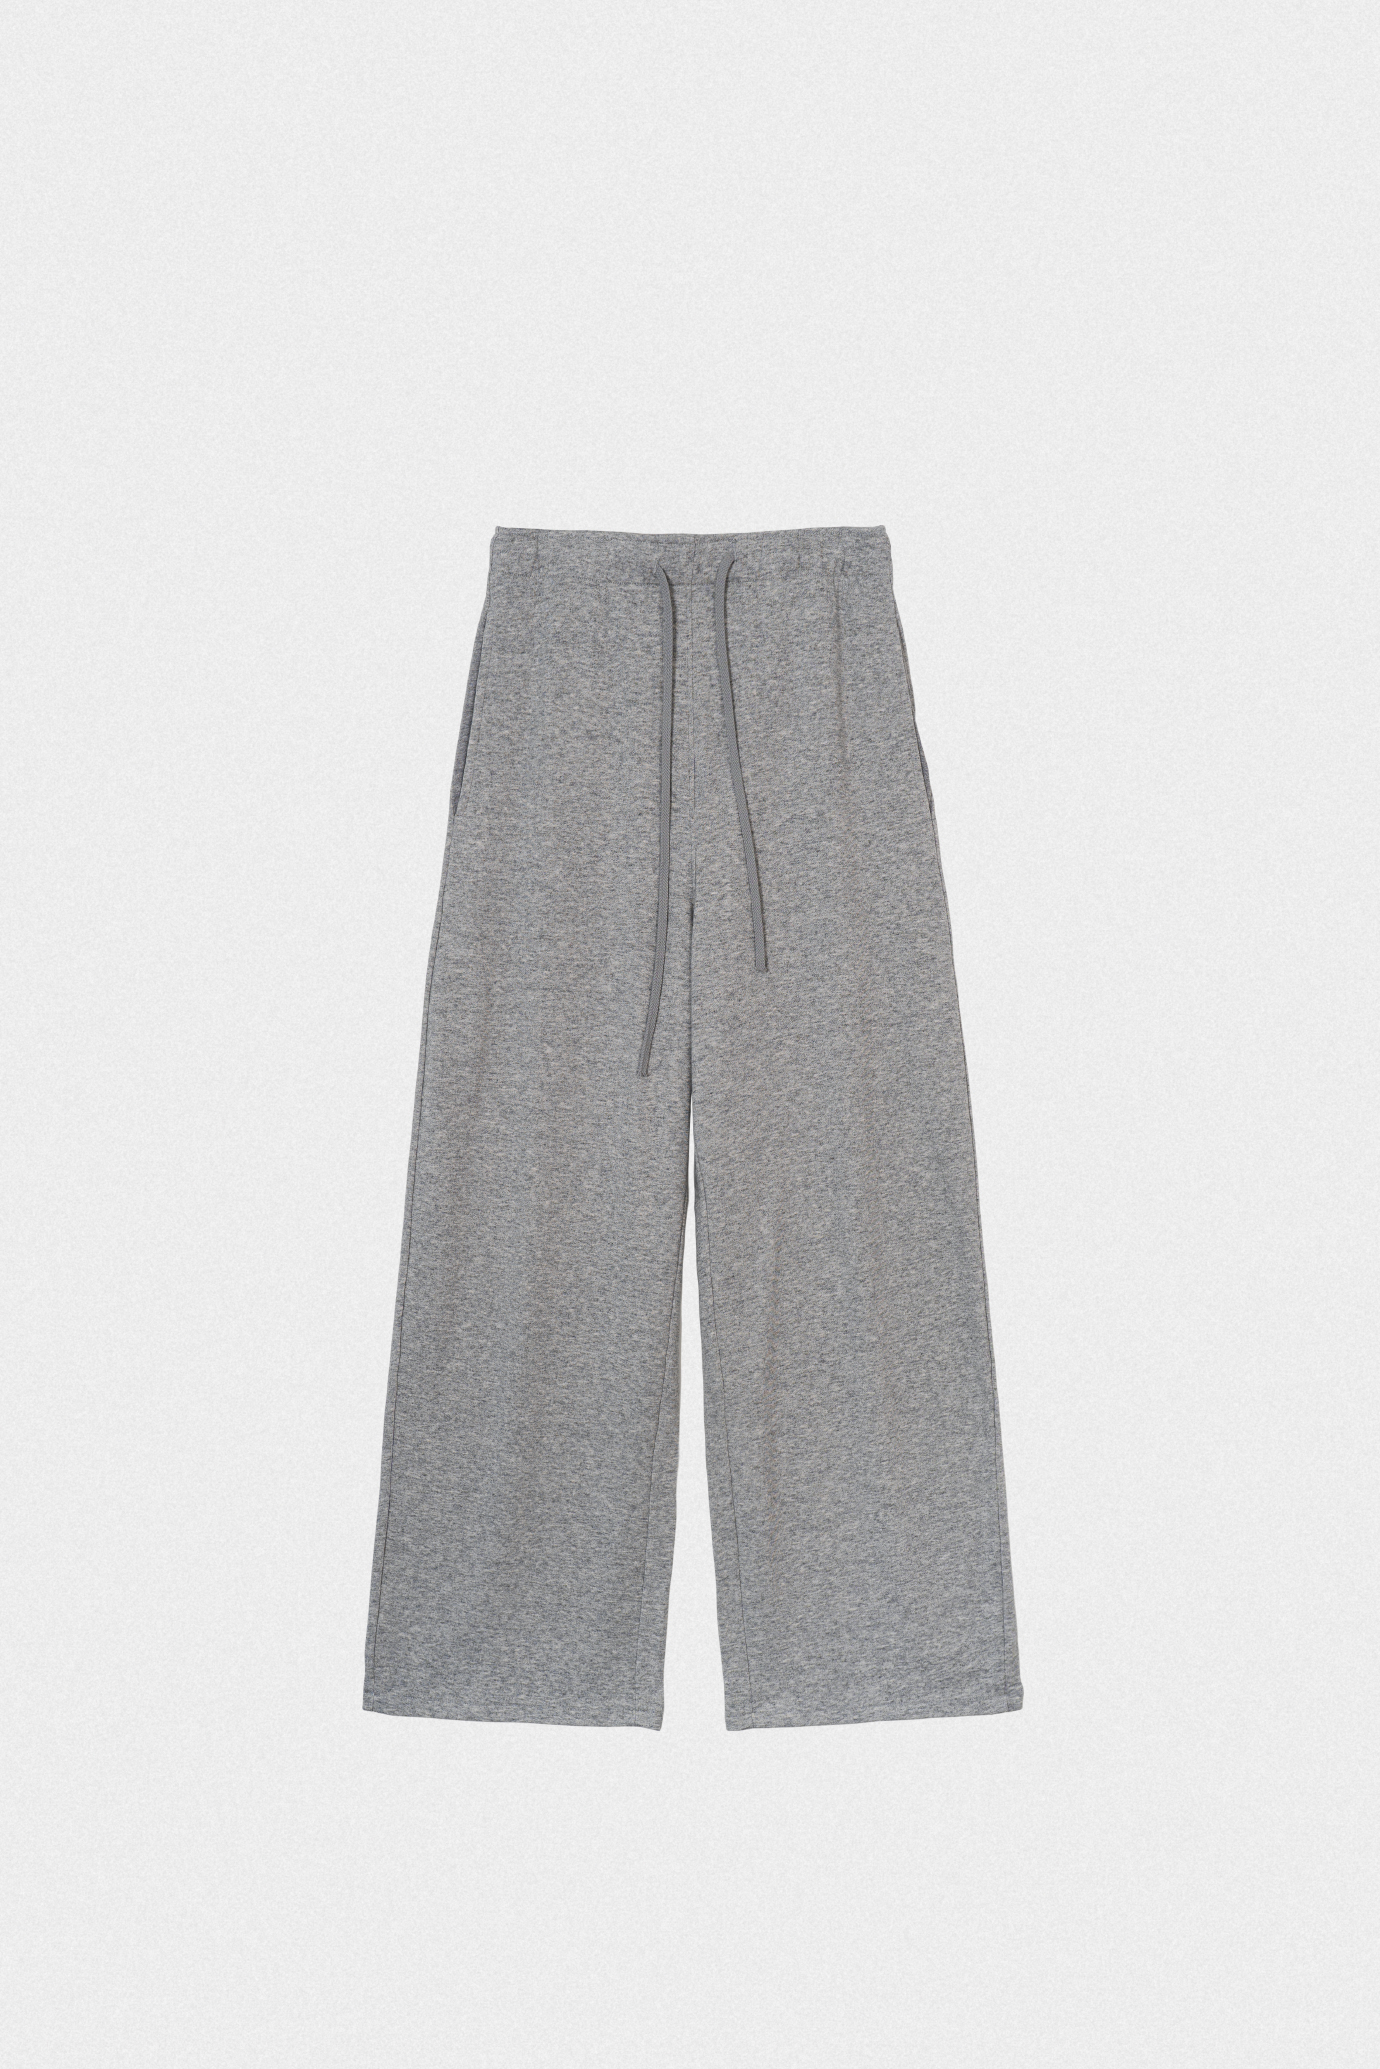 20090_French Terry Sweatpants